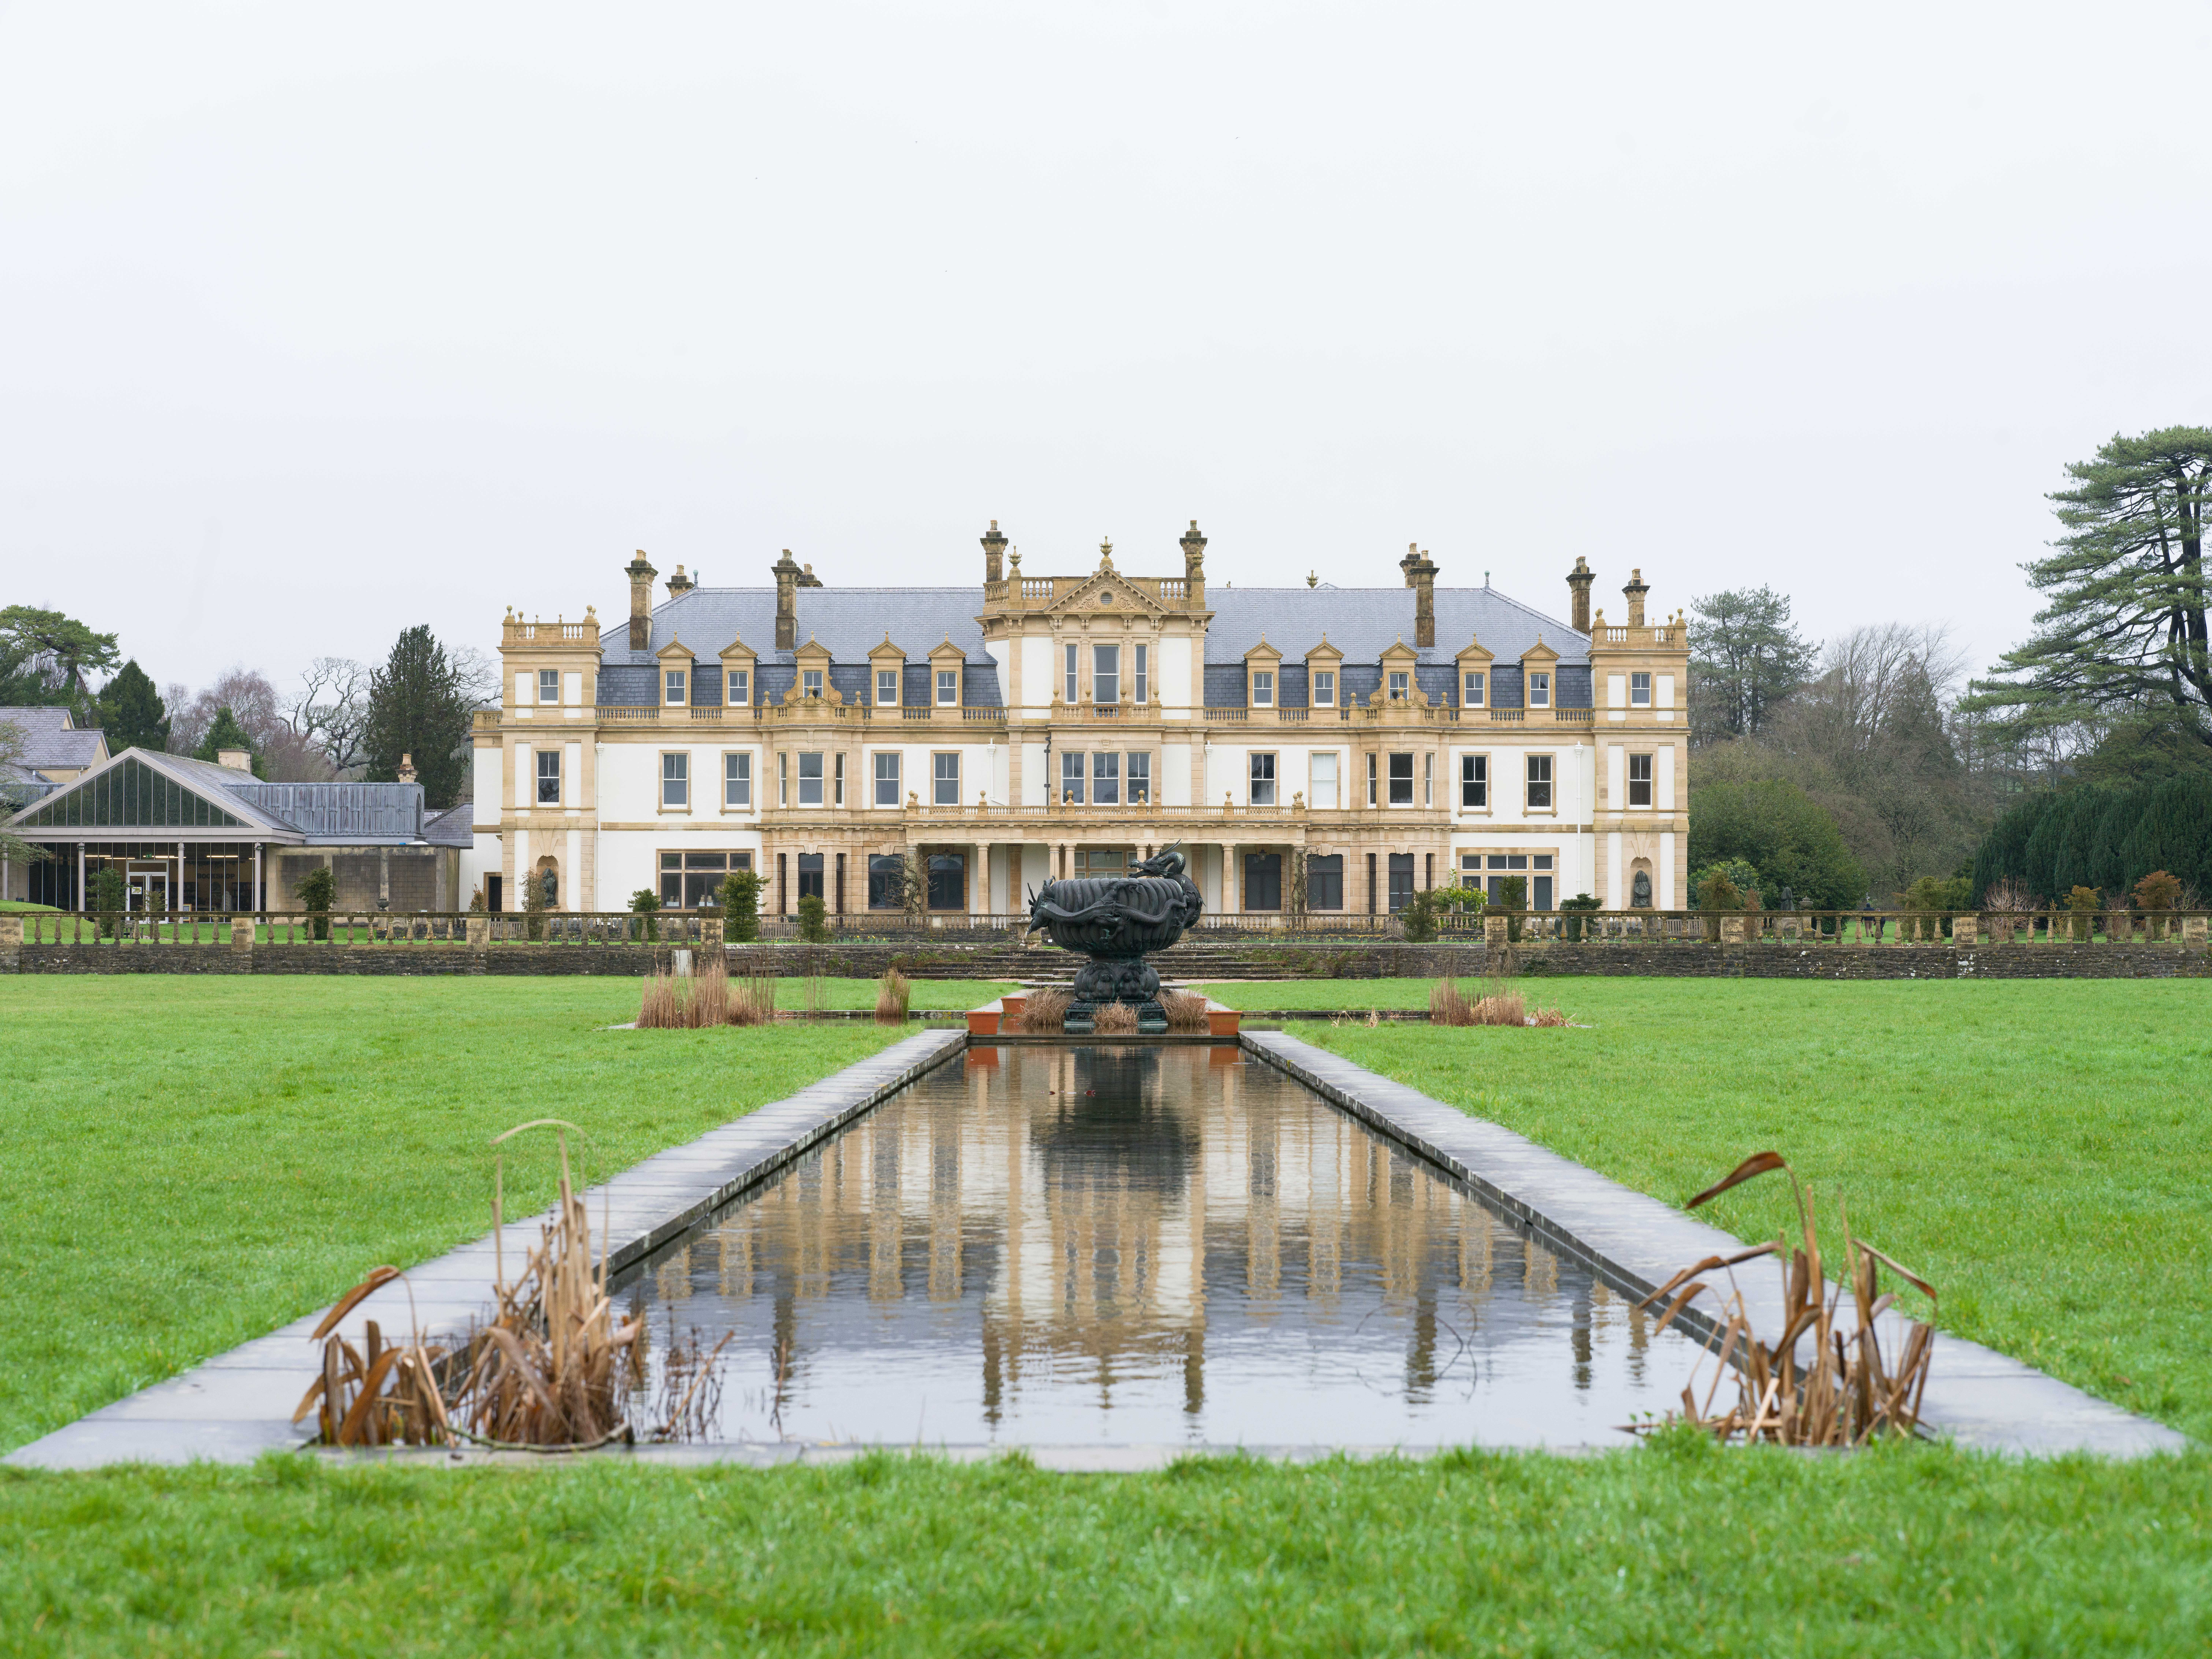 A photo of a British stately home on an overcast day, reflected in a water feature with a large sculpture in the mid-ground.